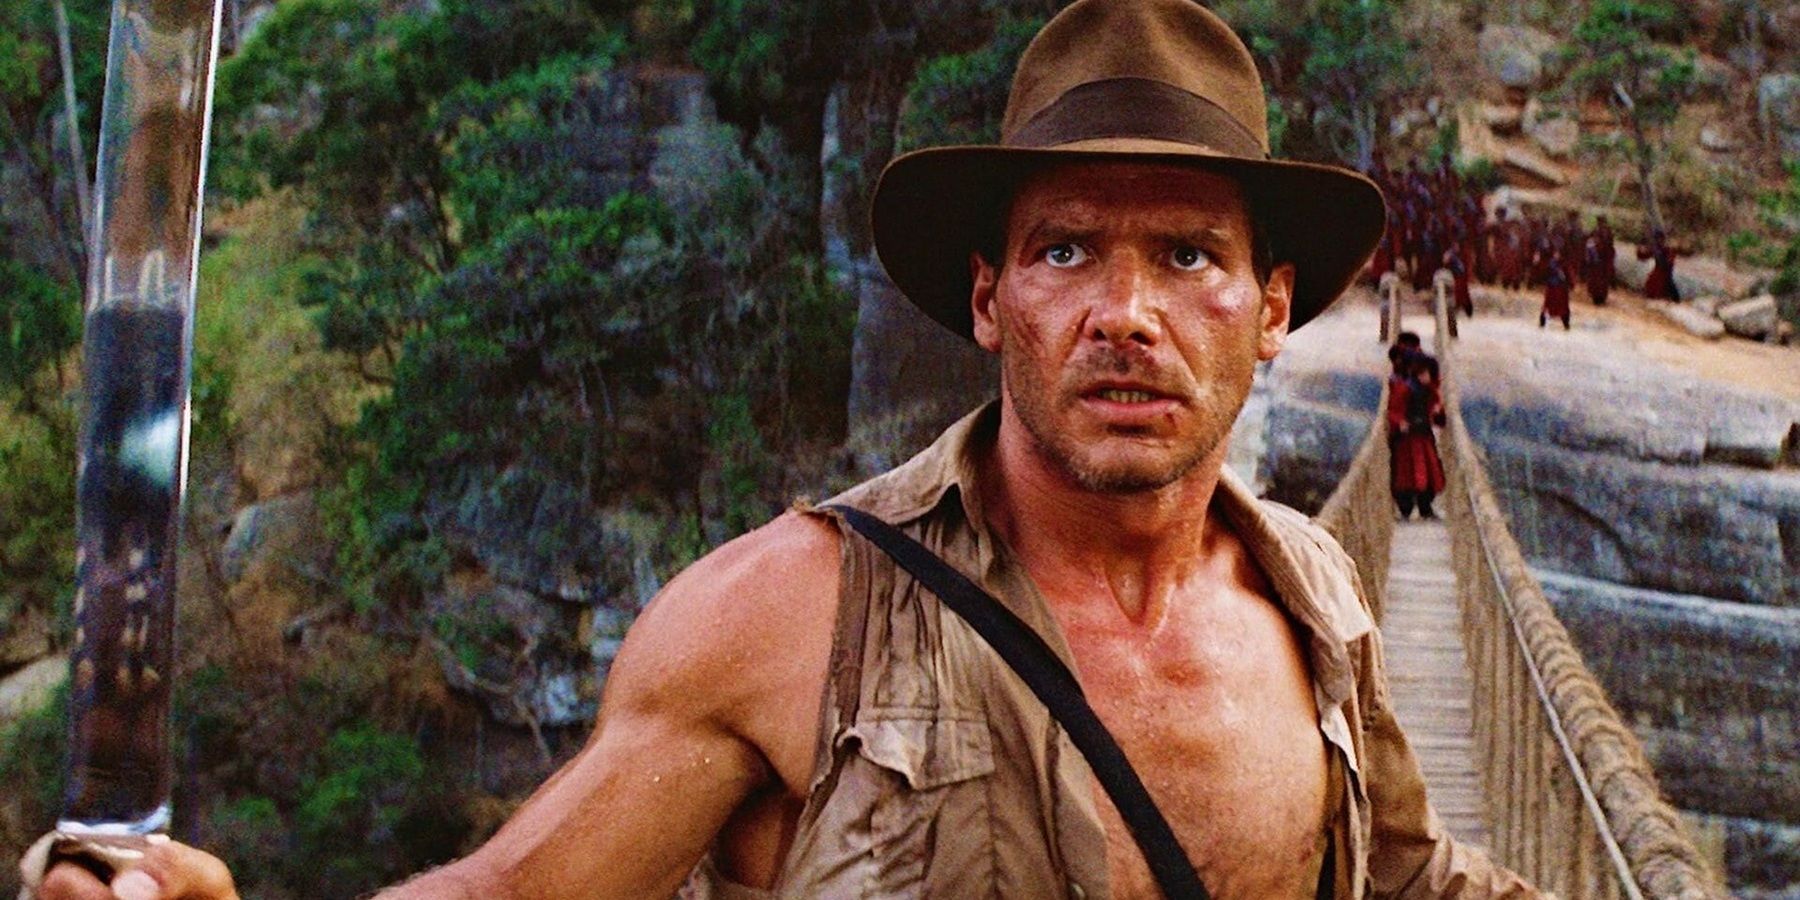 rumor-indiana-jones-game-being-worked-on-by-more-than-just-machinegames